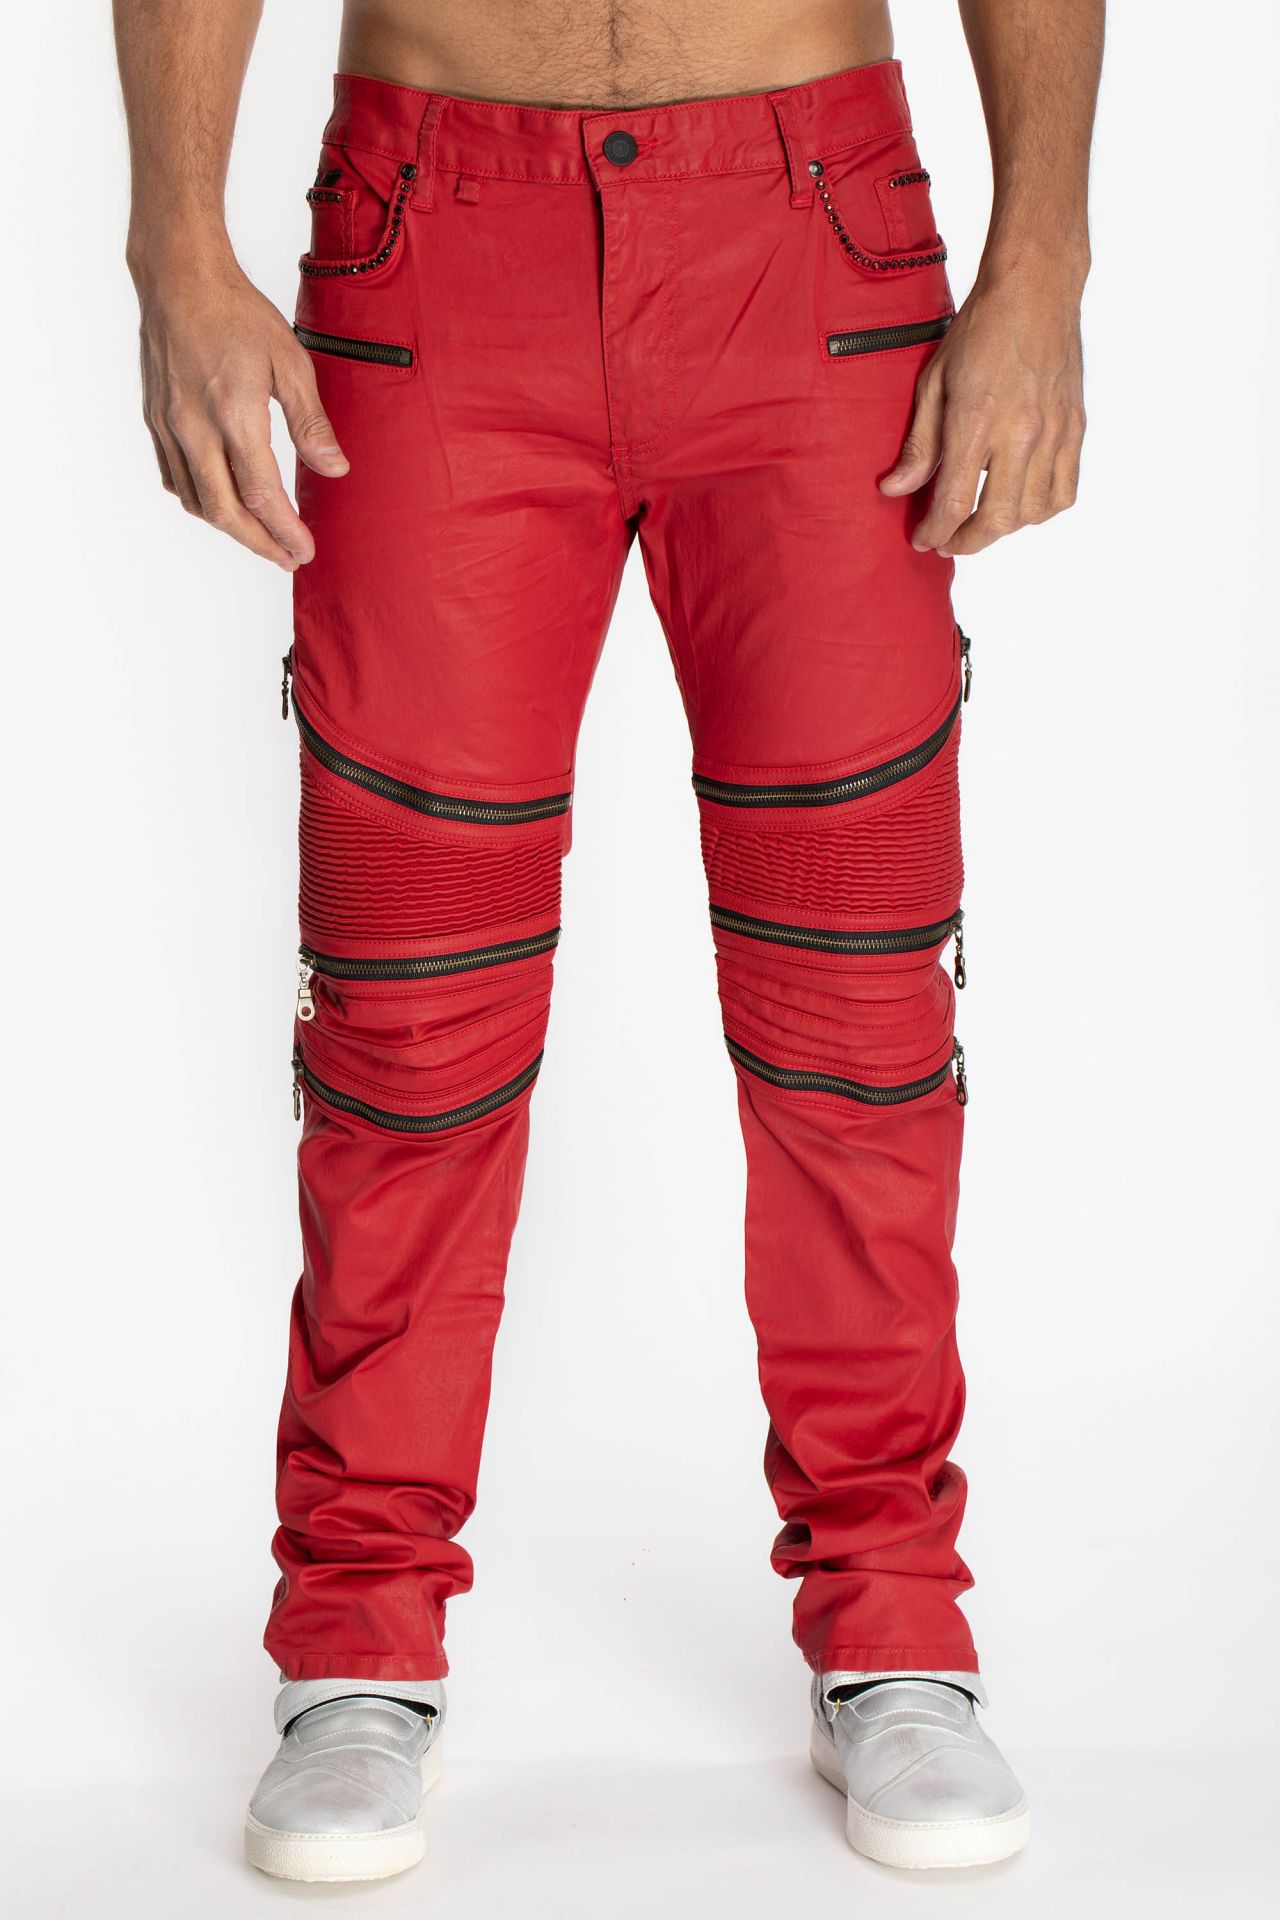 MENS BIKER SLIM JEANS IN DY RED WITH CRYSTALS